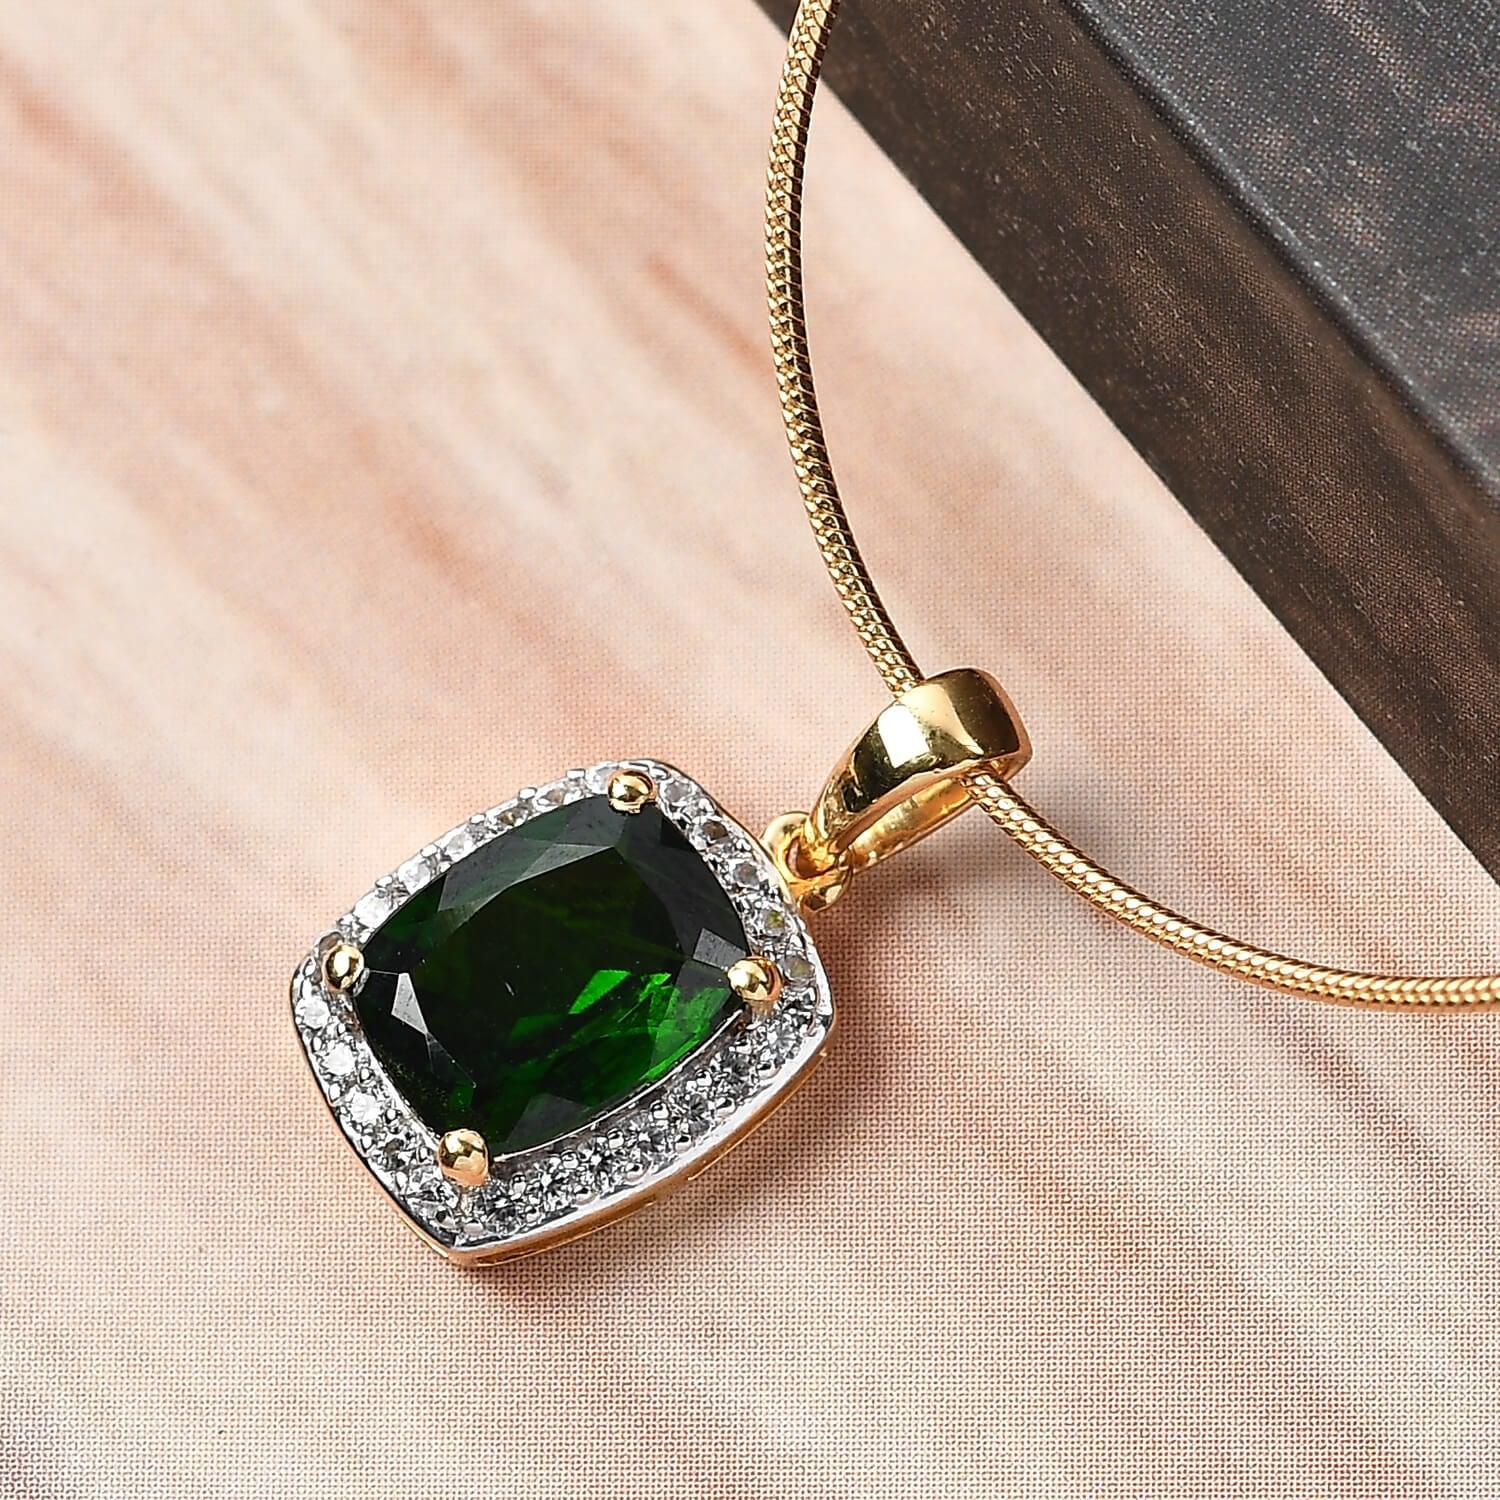 All About Chrome Diopside - The Rare and Beautiful Green Gemstone - Inspiring Jewellery